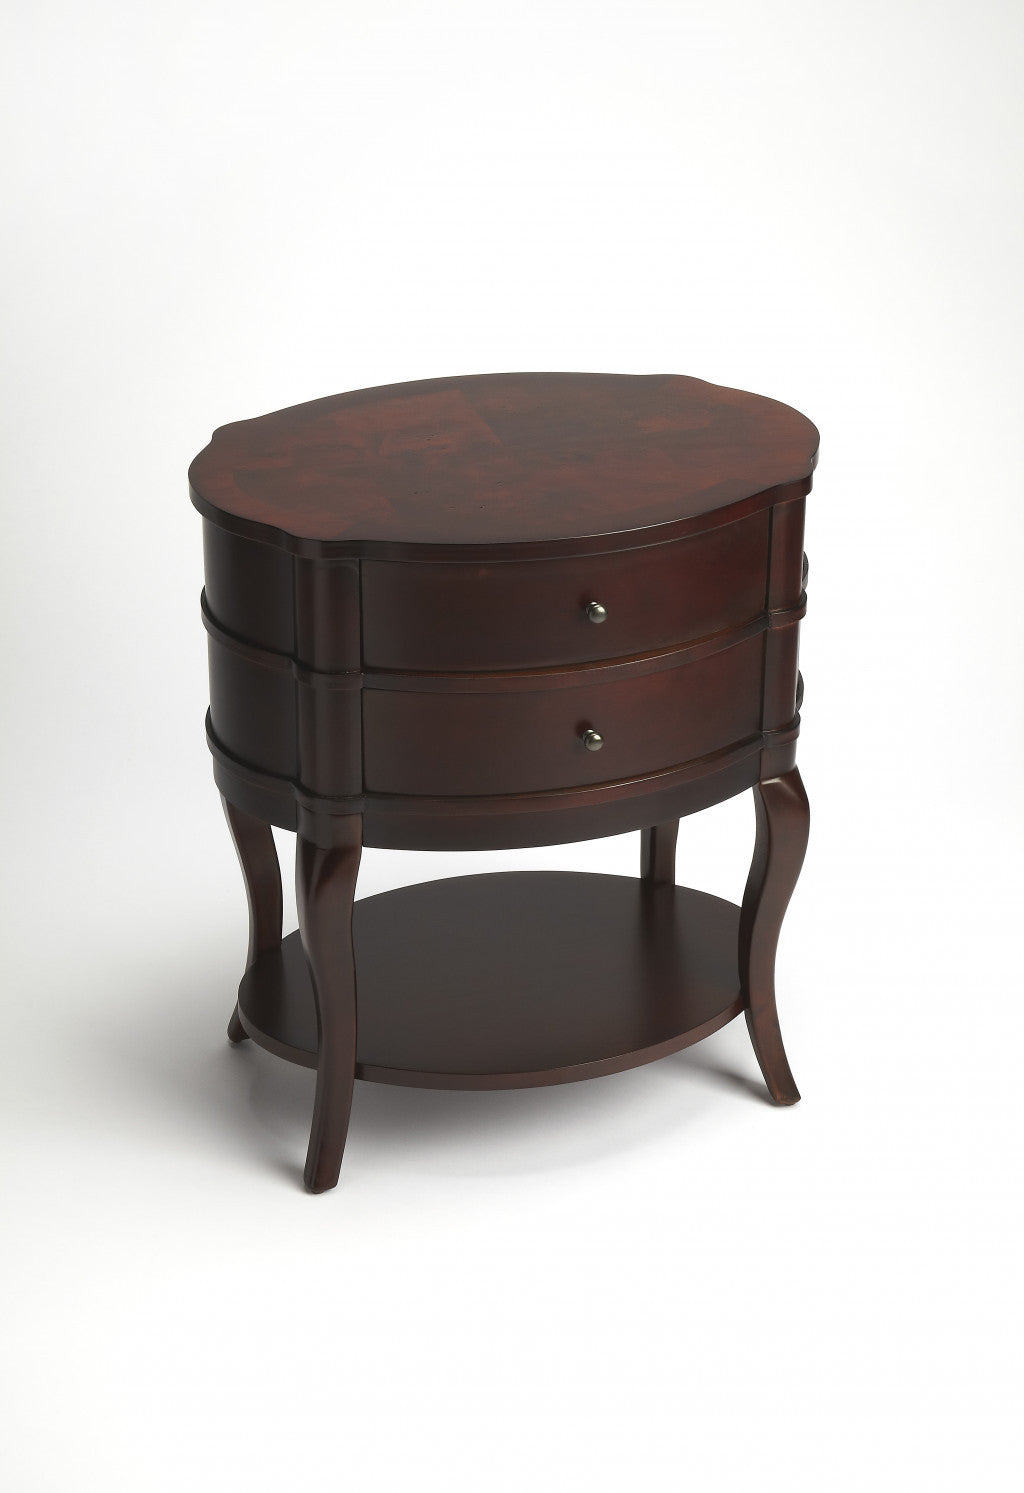 26" Dark Brown And Cherry Solid And Manufactured Wood Oval End Table With Two Drawers And Shelf